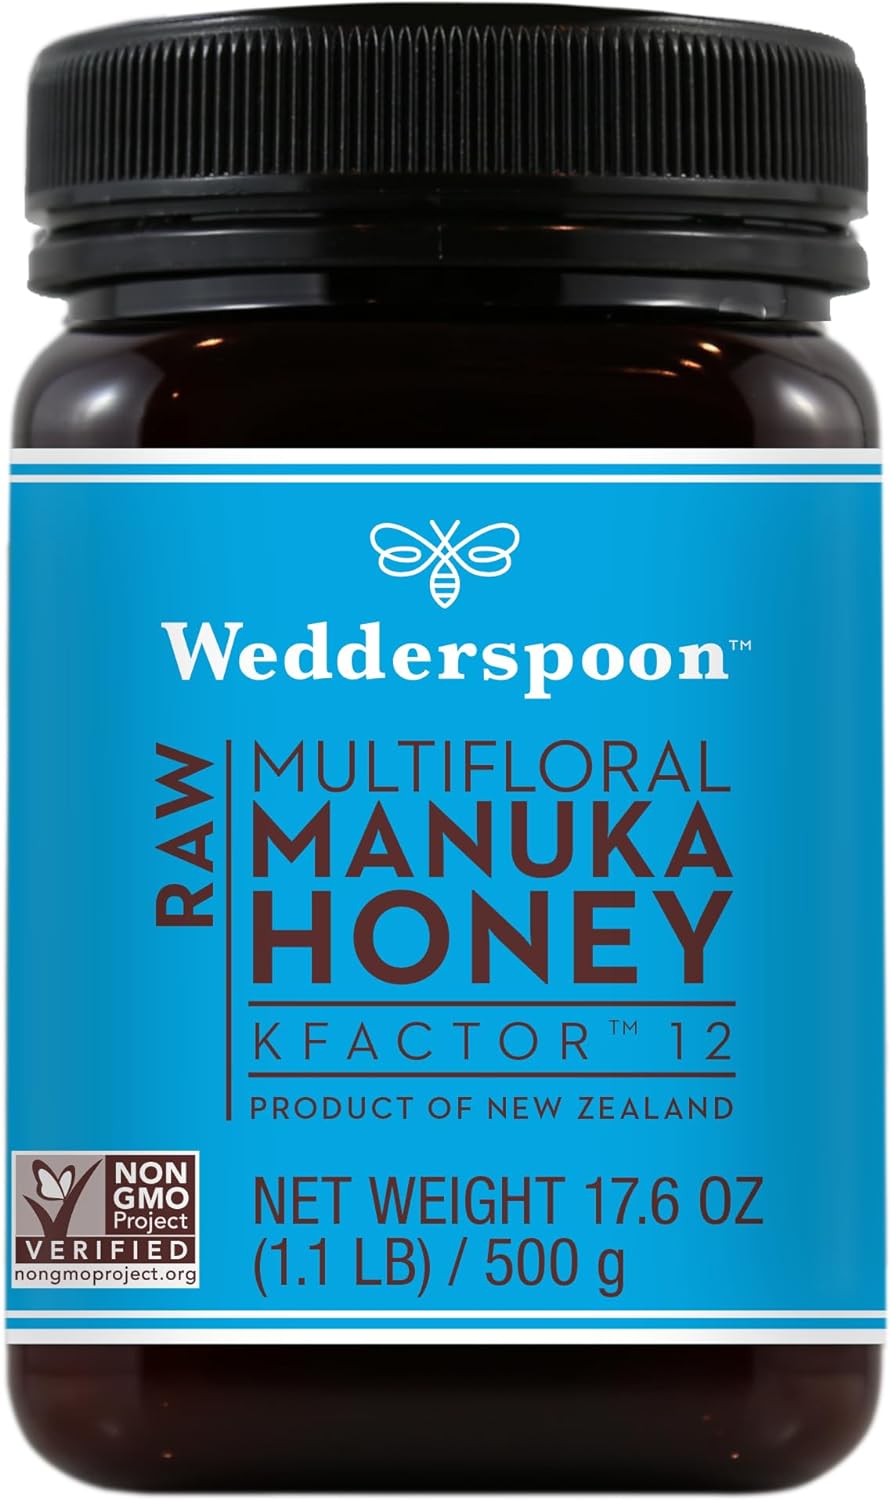 Wedderspoon Raw Premium Manuka Honey, KFactor 12, 17.6 Oz, Unpasteurized, Genuine New Zealand Honey, Non-GMO Superfood, Traceable From Our Hives To Your Home